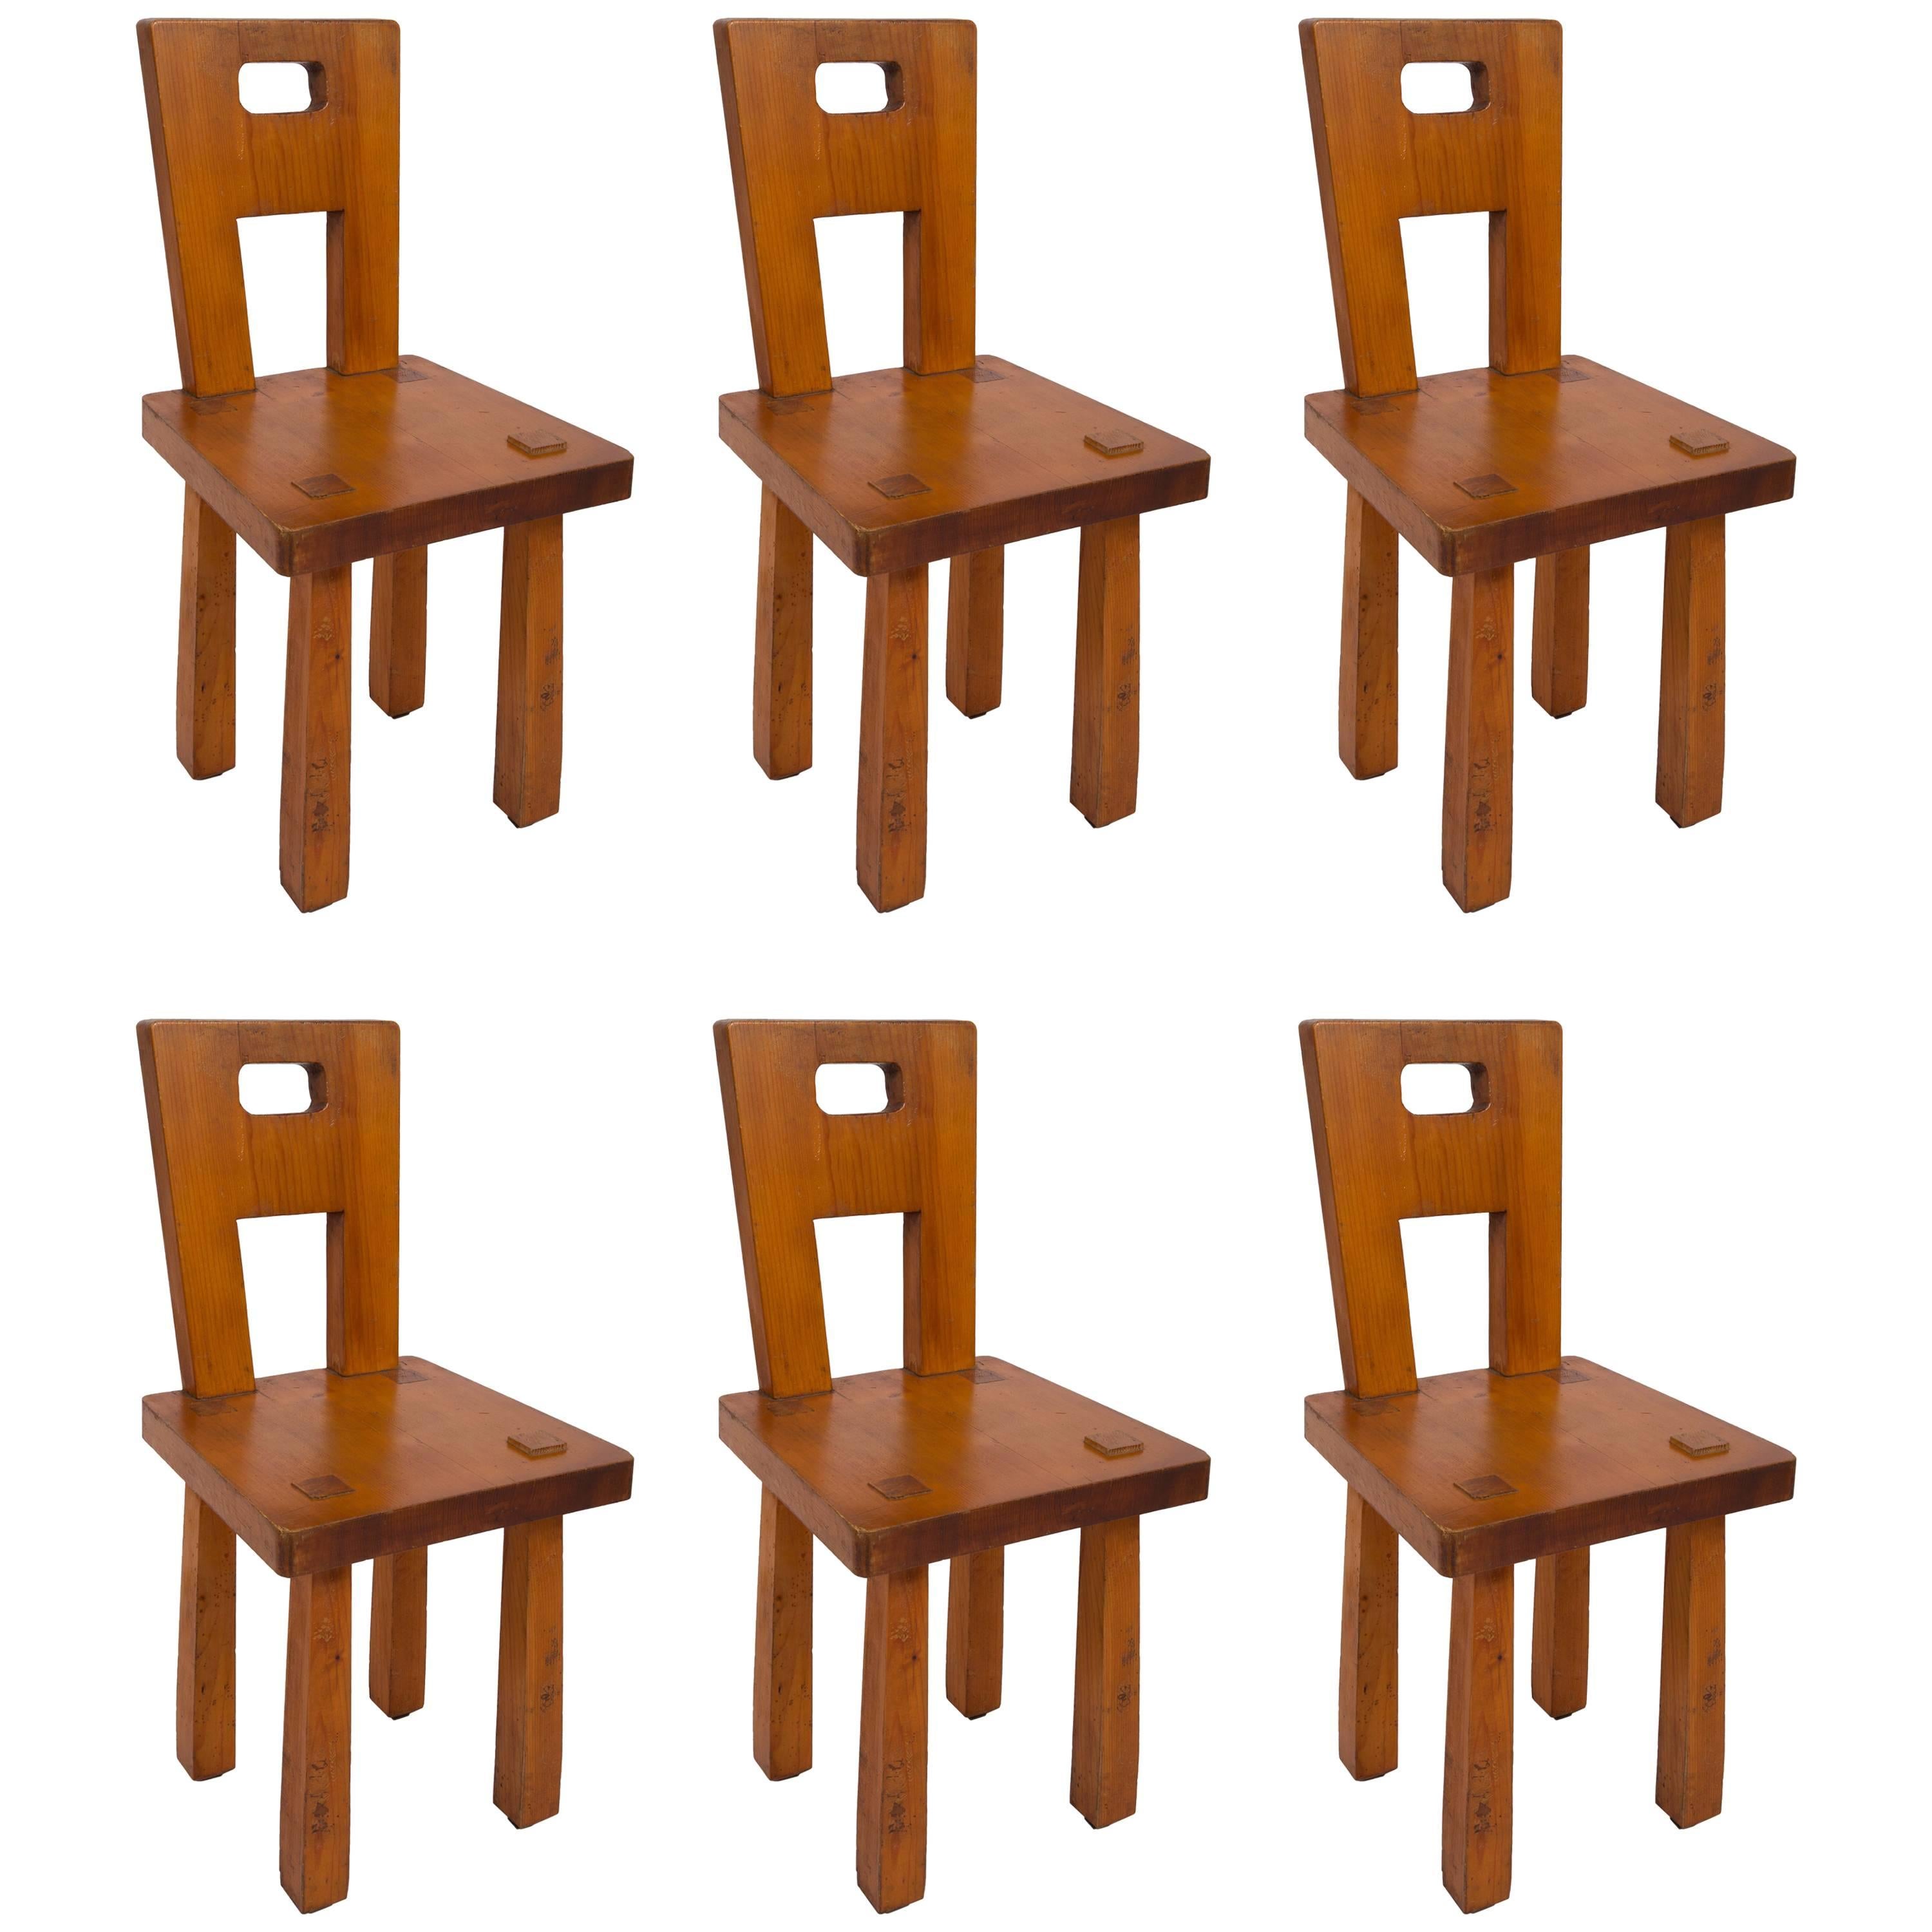 Set of Six Rustic Wooden Dining Chairs